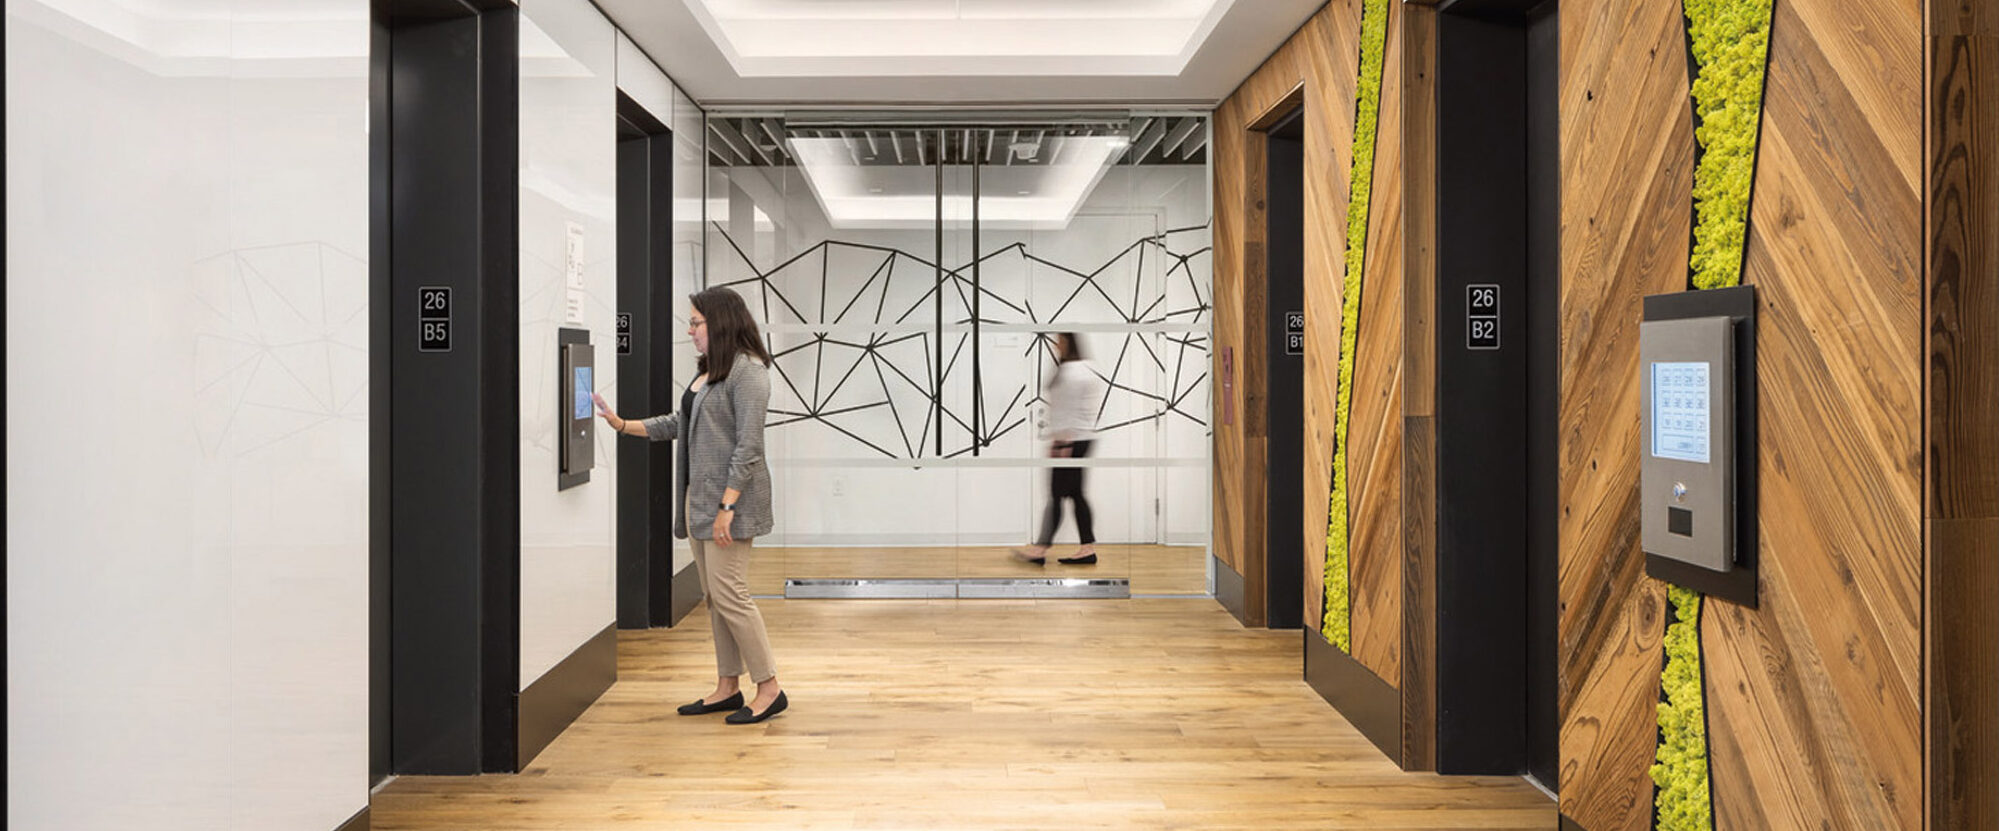 Modern office hallway featuring warm wood floors, contrasting white and woodgrain walls with vibrant green moss accents, geometric patterns, and sleek elevator doors; inclusive design with accessible signage and an interactive directory panel.